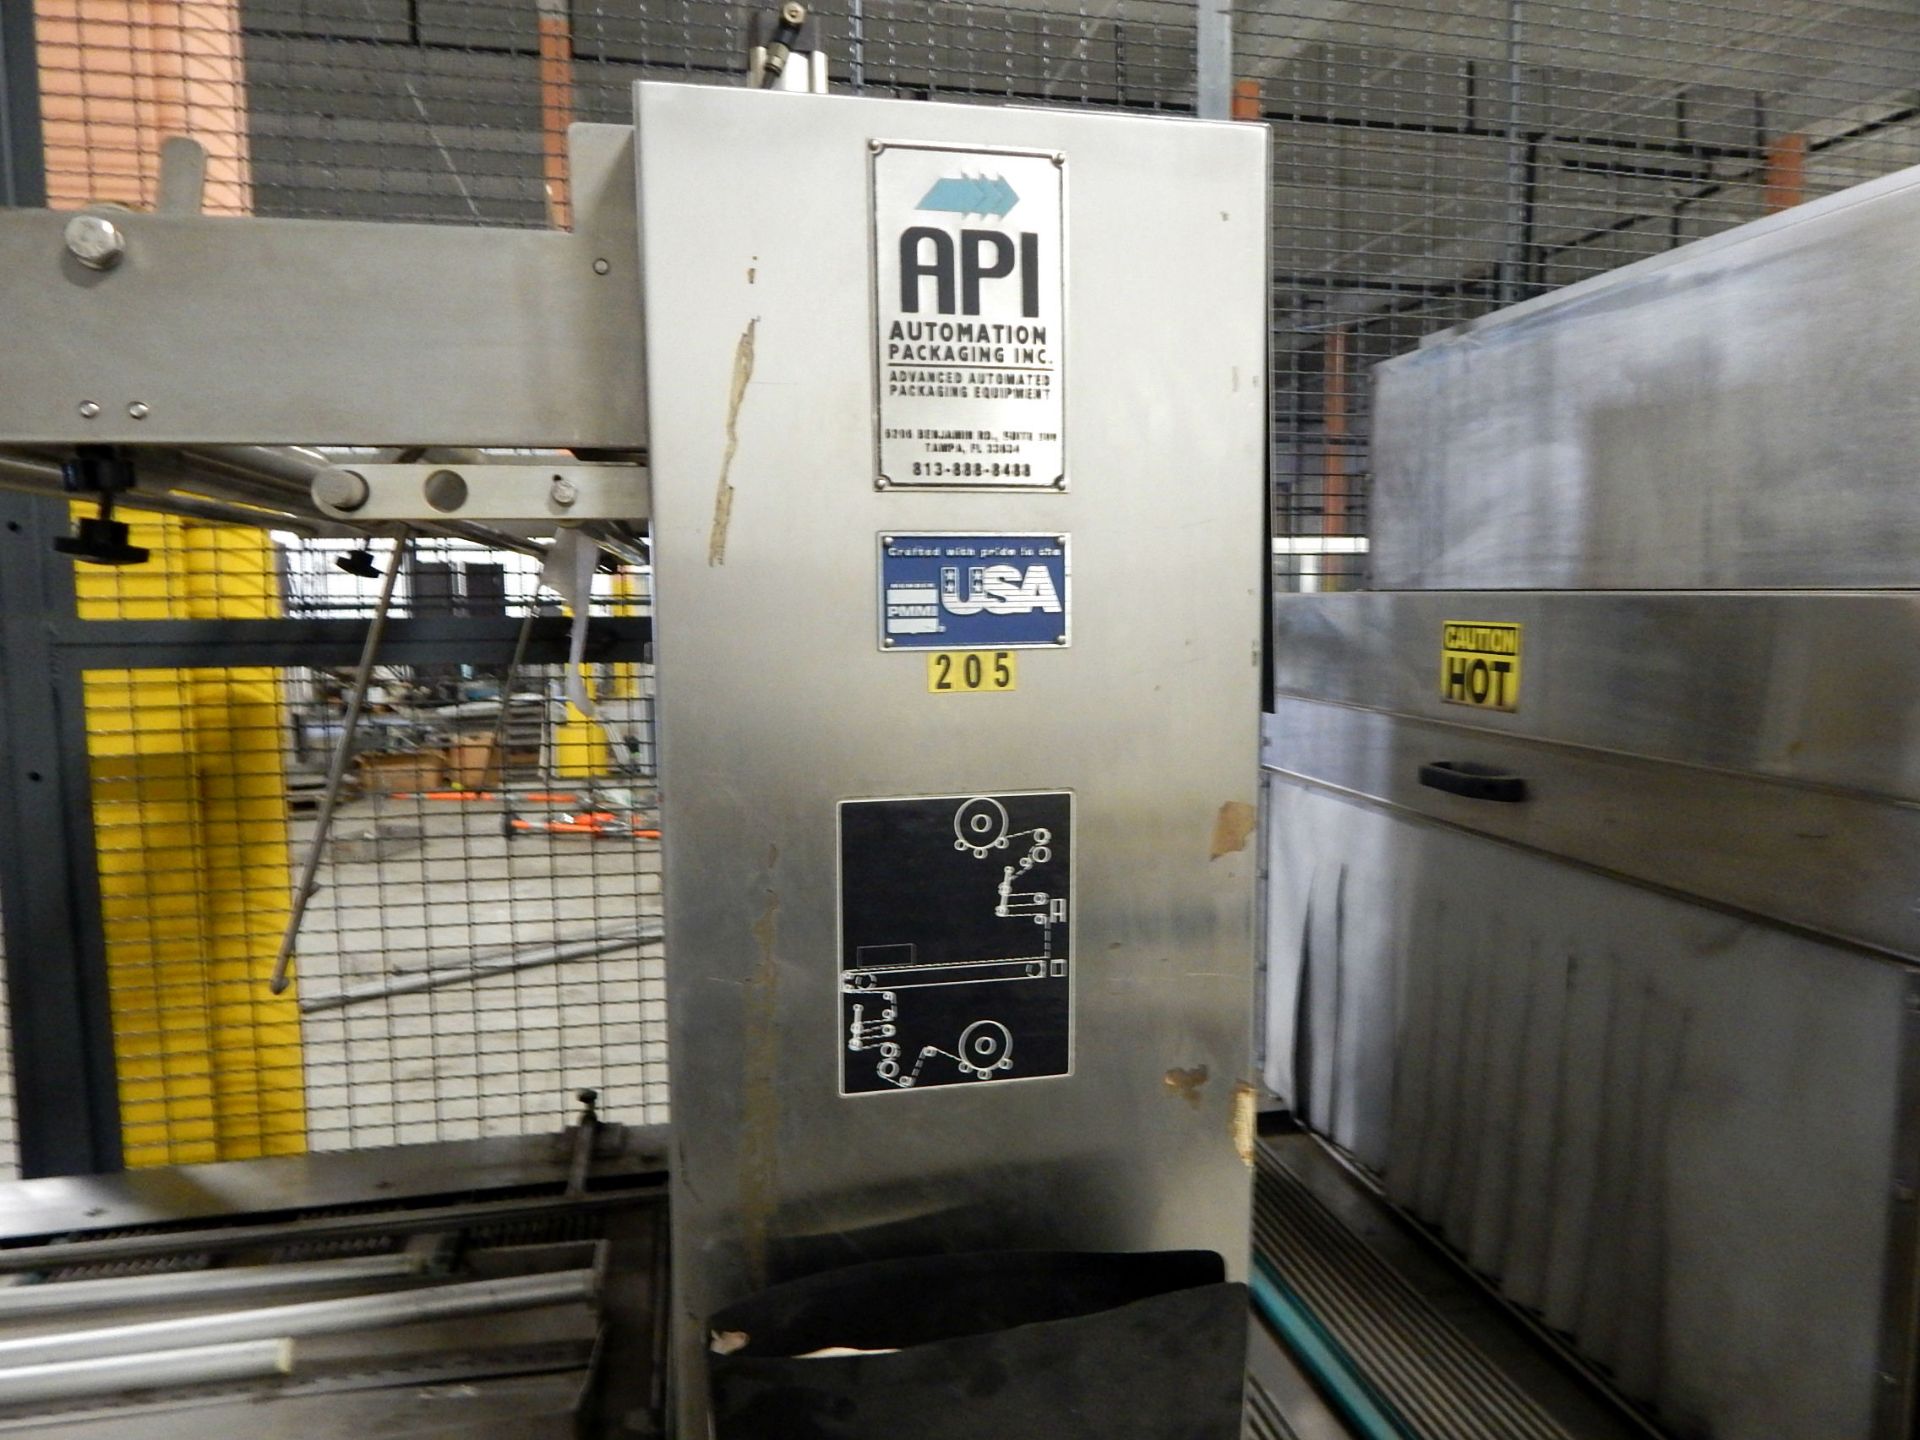 AUTOMATIC ALL STAINLESS STEEL CASE/TRAY OVERWRAPPER BY AUTOMATION PACKAGING INC. - Image 6 of 9